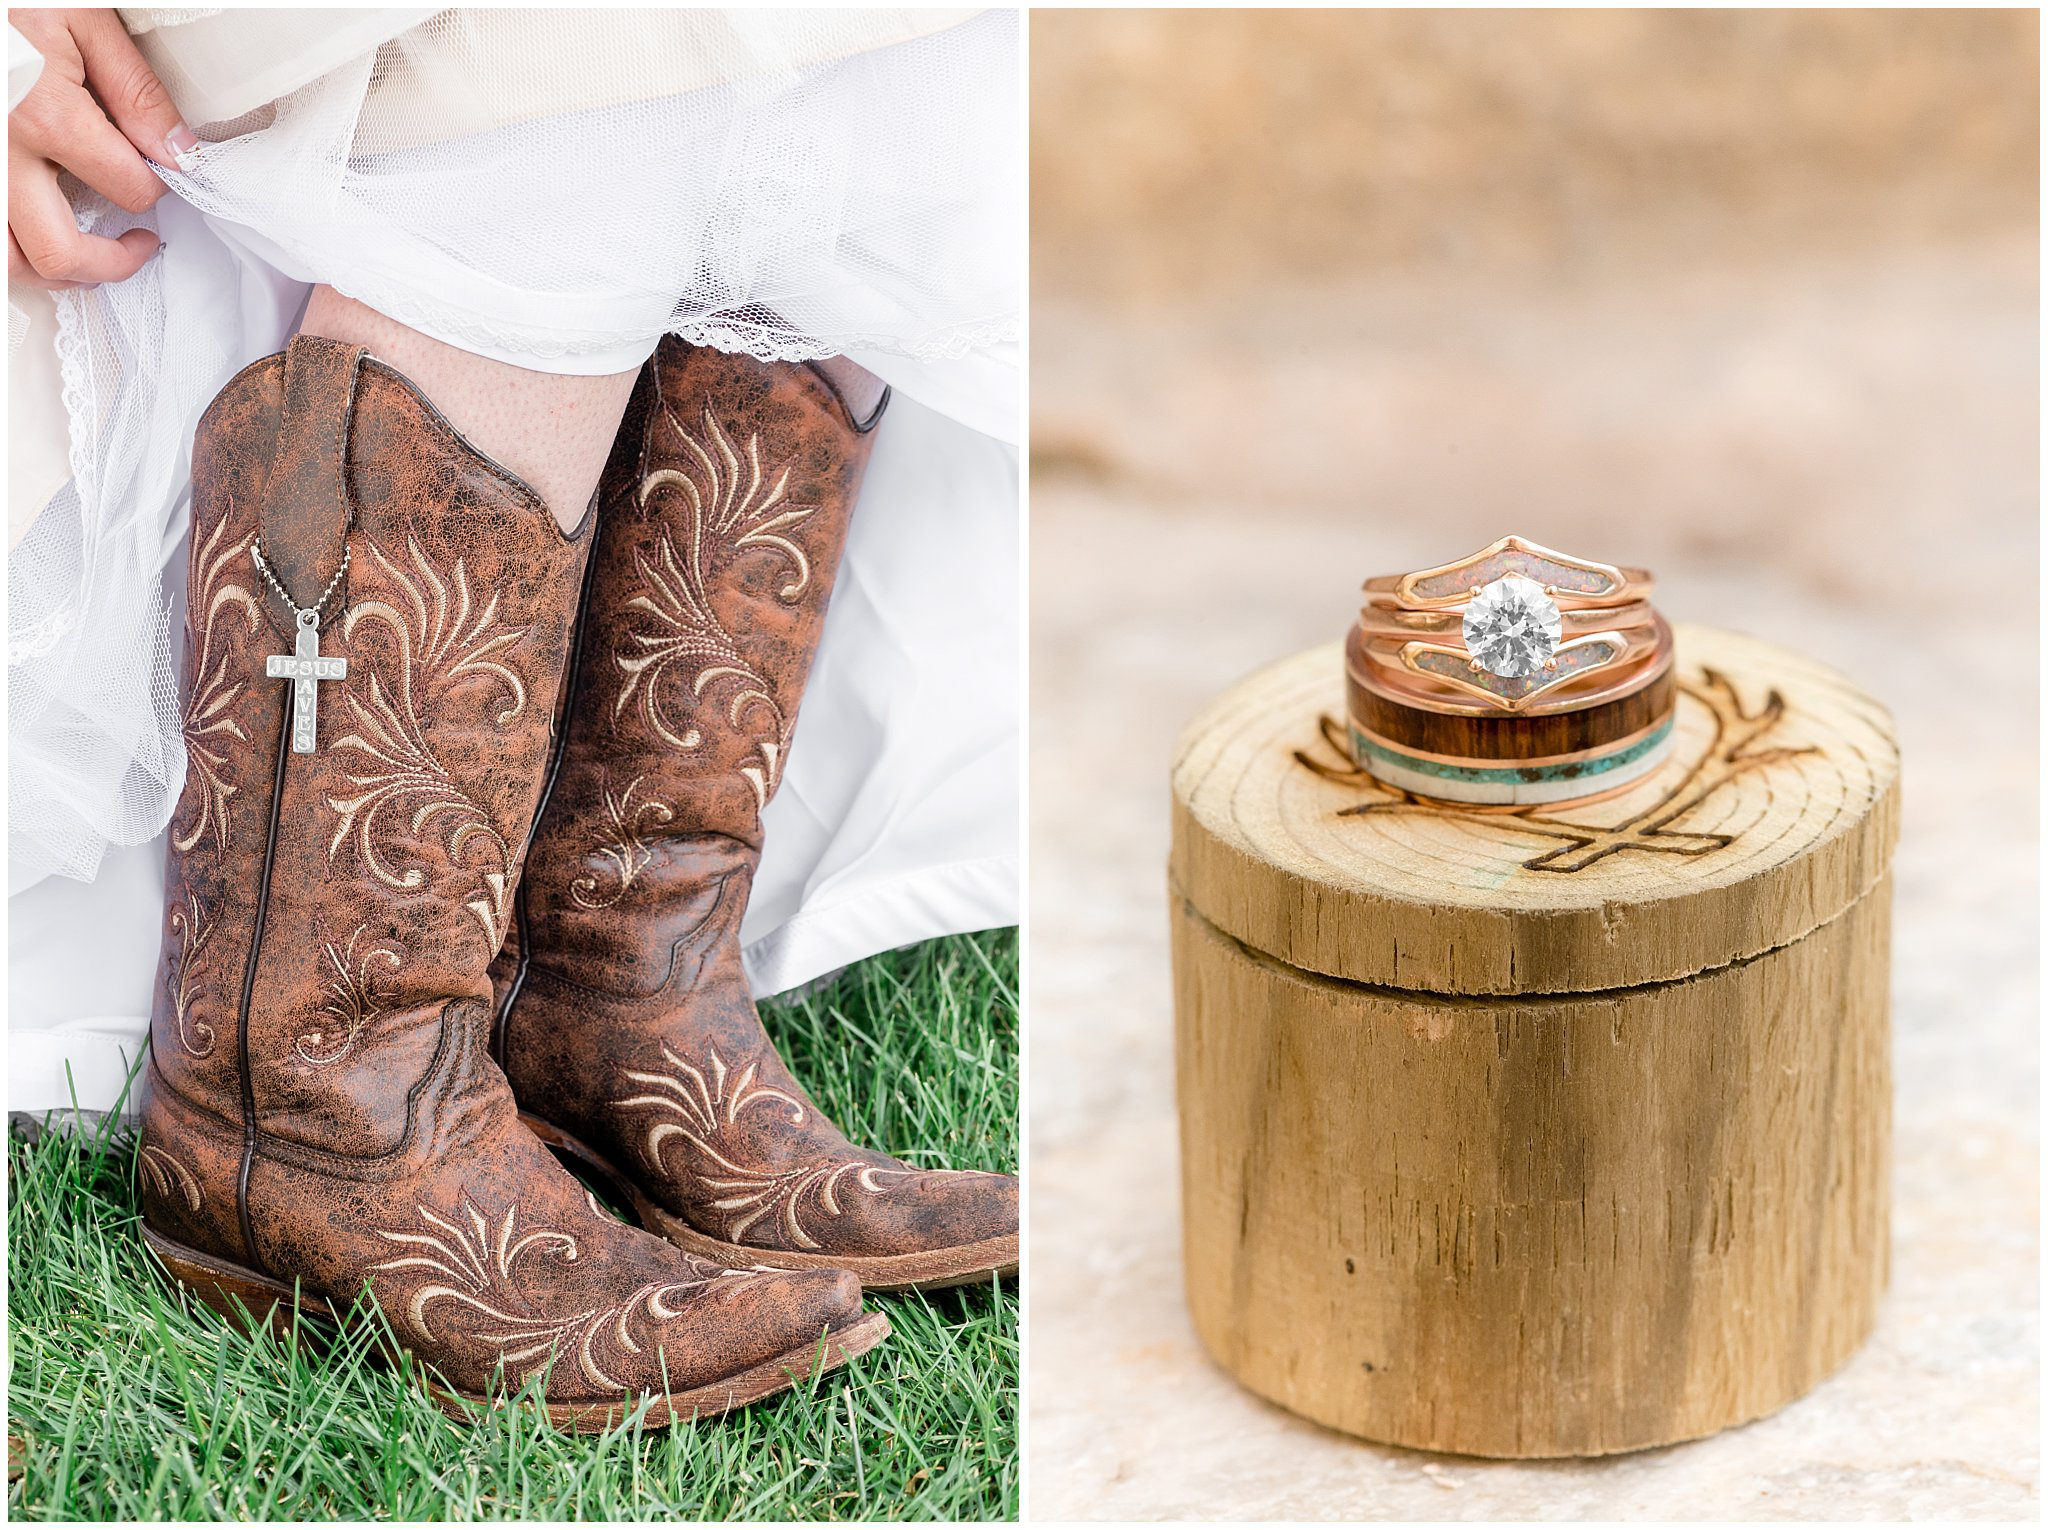 Cowboy boots and Staghead Design Ring | Stress Free Wedding Day Advice | Jessie and Dallin Photography